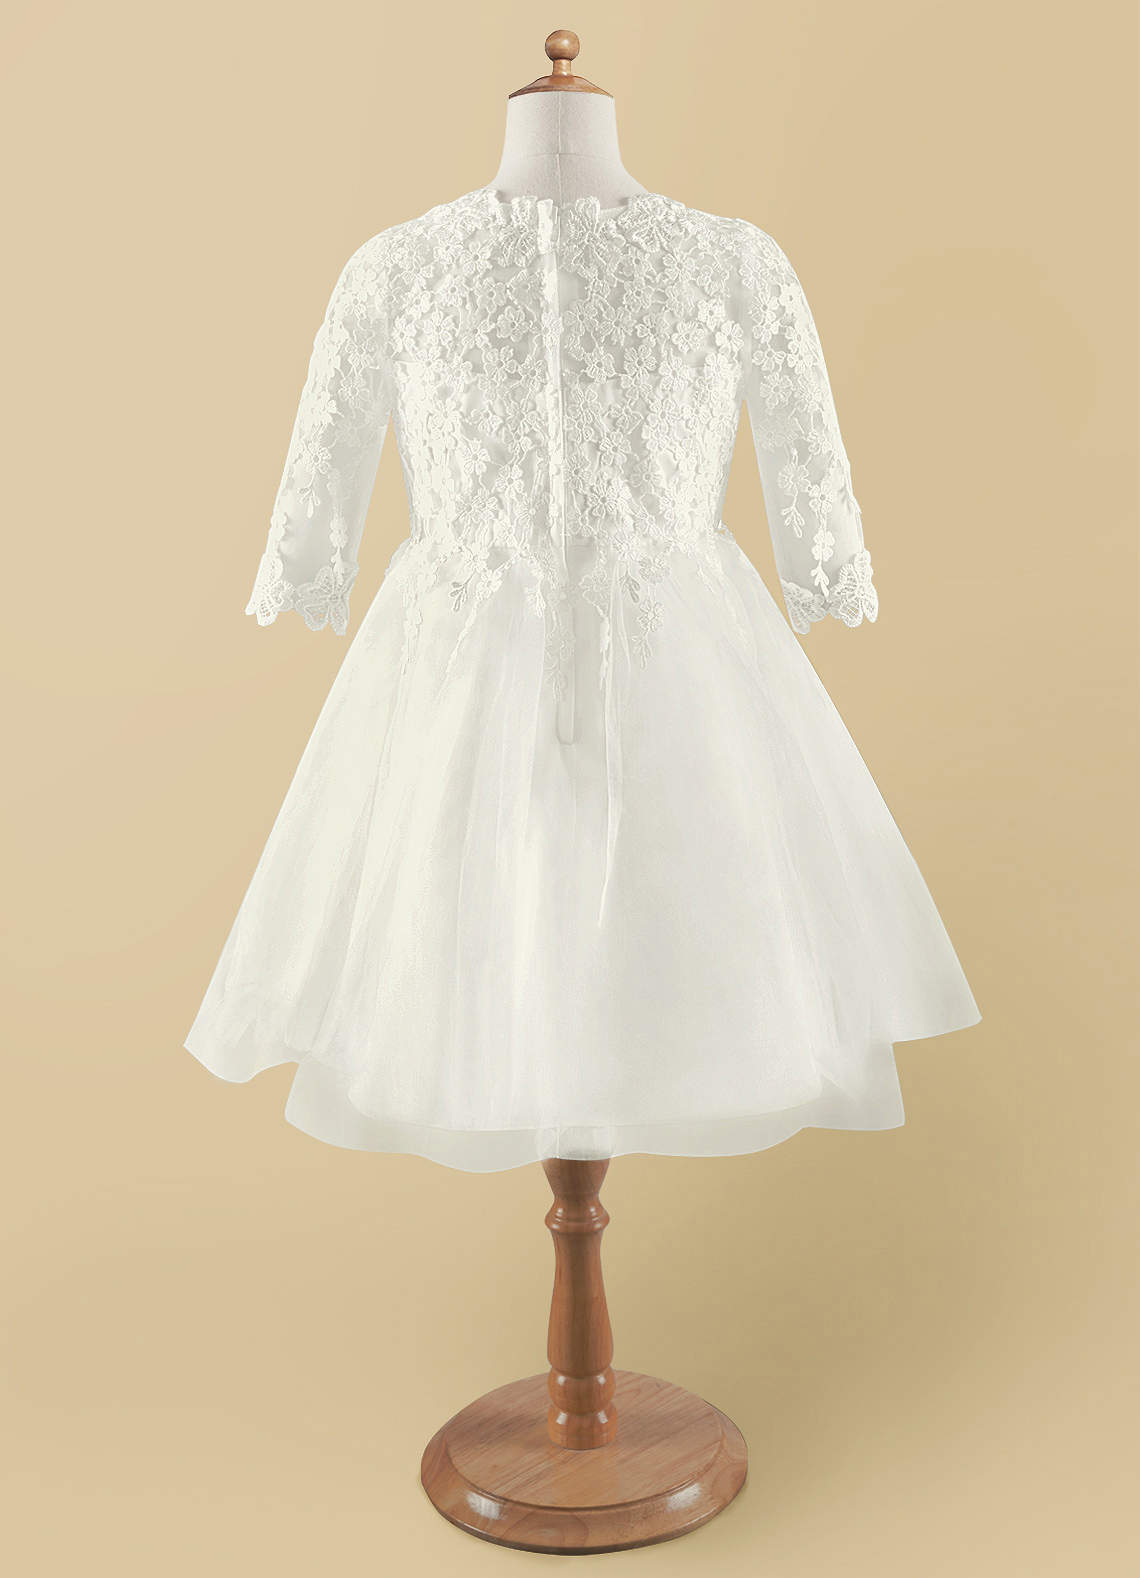 Azazie lindsay Flower Girl Dresses Ball-Gown Lace Tulle Knee-Length Dress image1